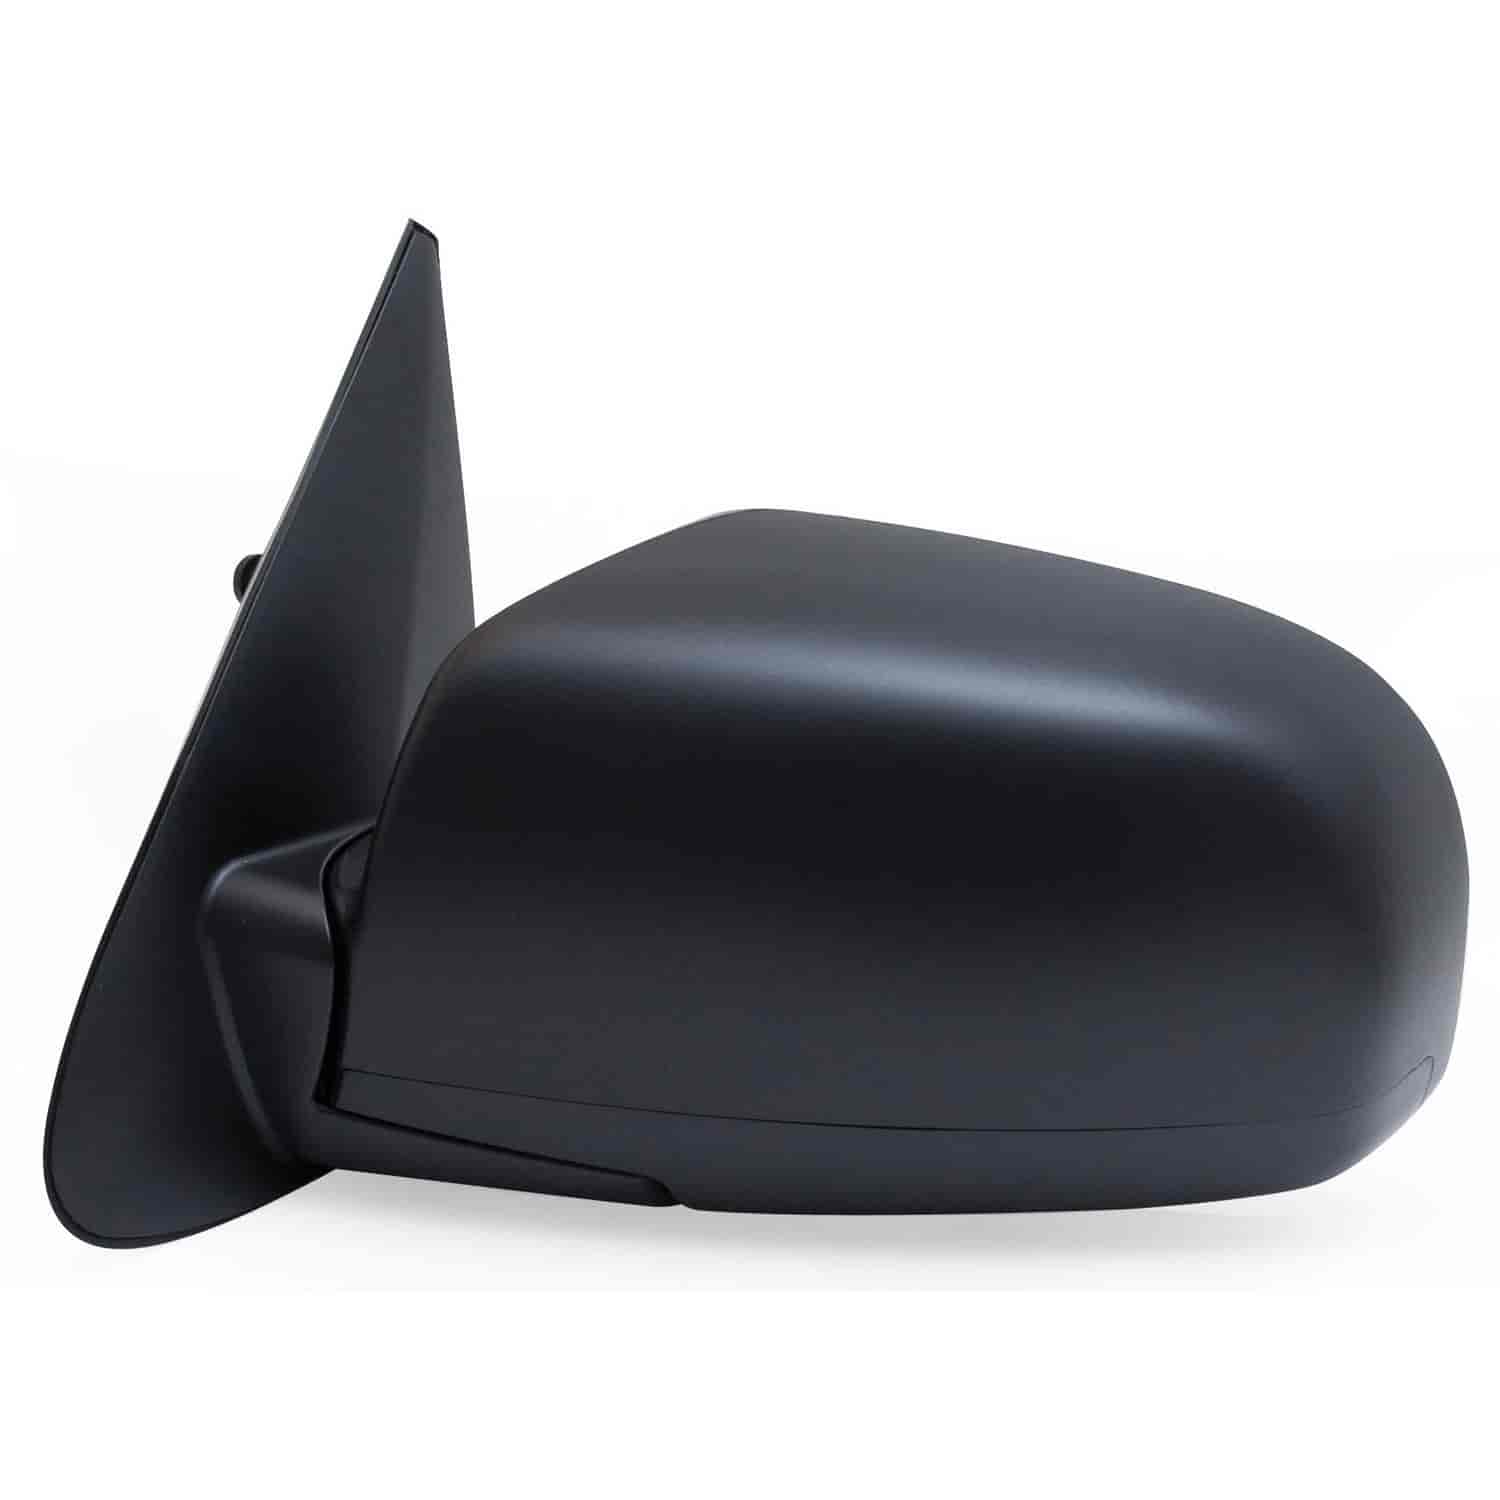 OEM Style Replacement mirror for 07-12 Hyundai Santa Fe driver side mirror tested to fit and functio